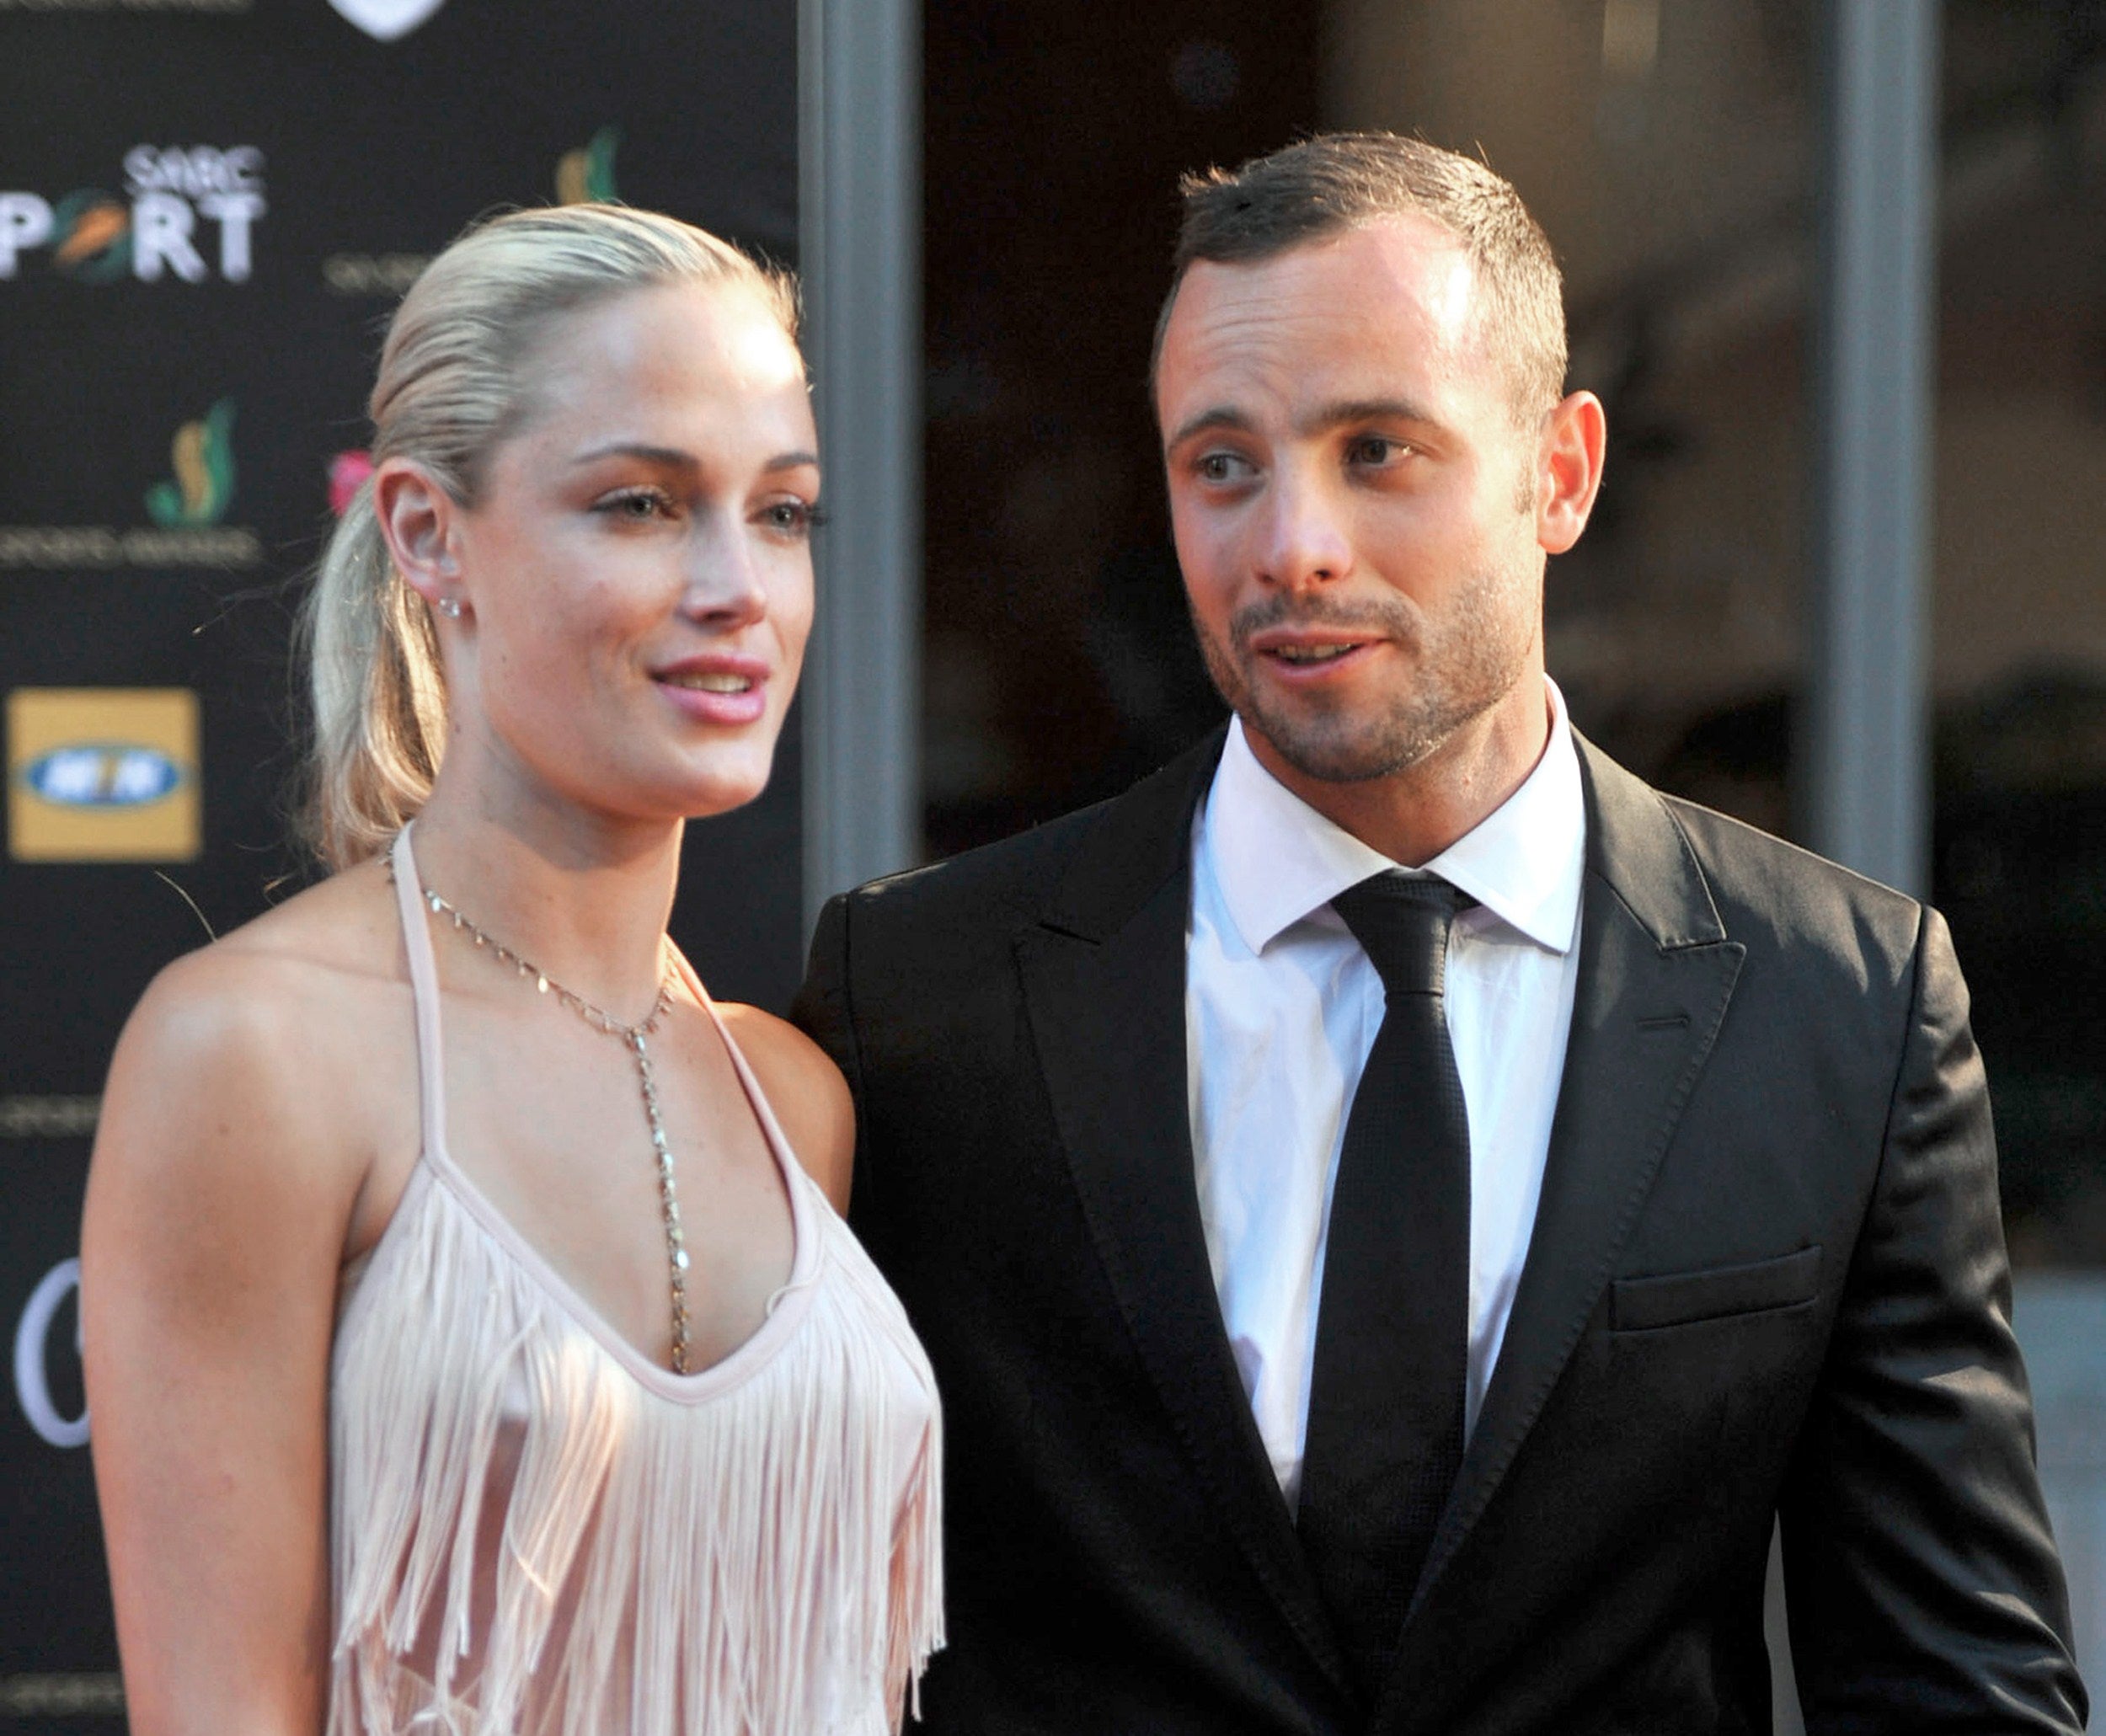 Oscar Pistorius and Reeva Steenkamp two years before he shot and killed her in their apartment